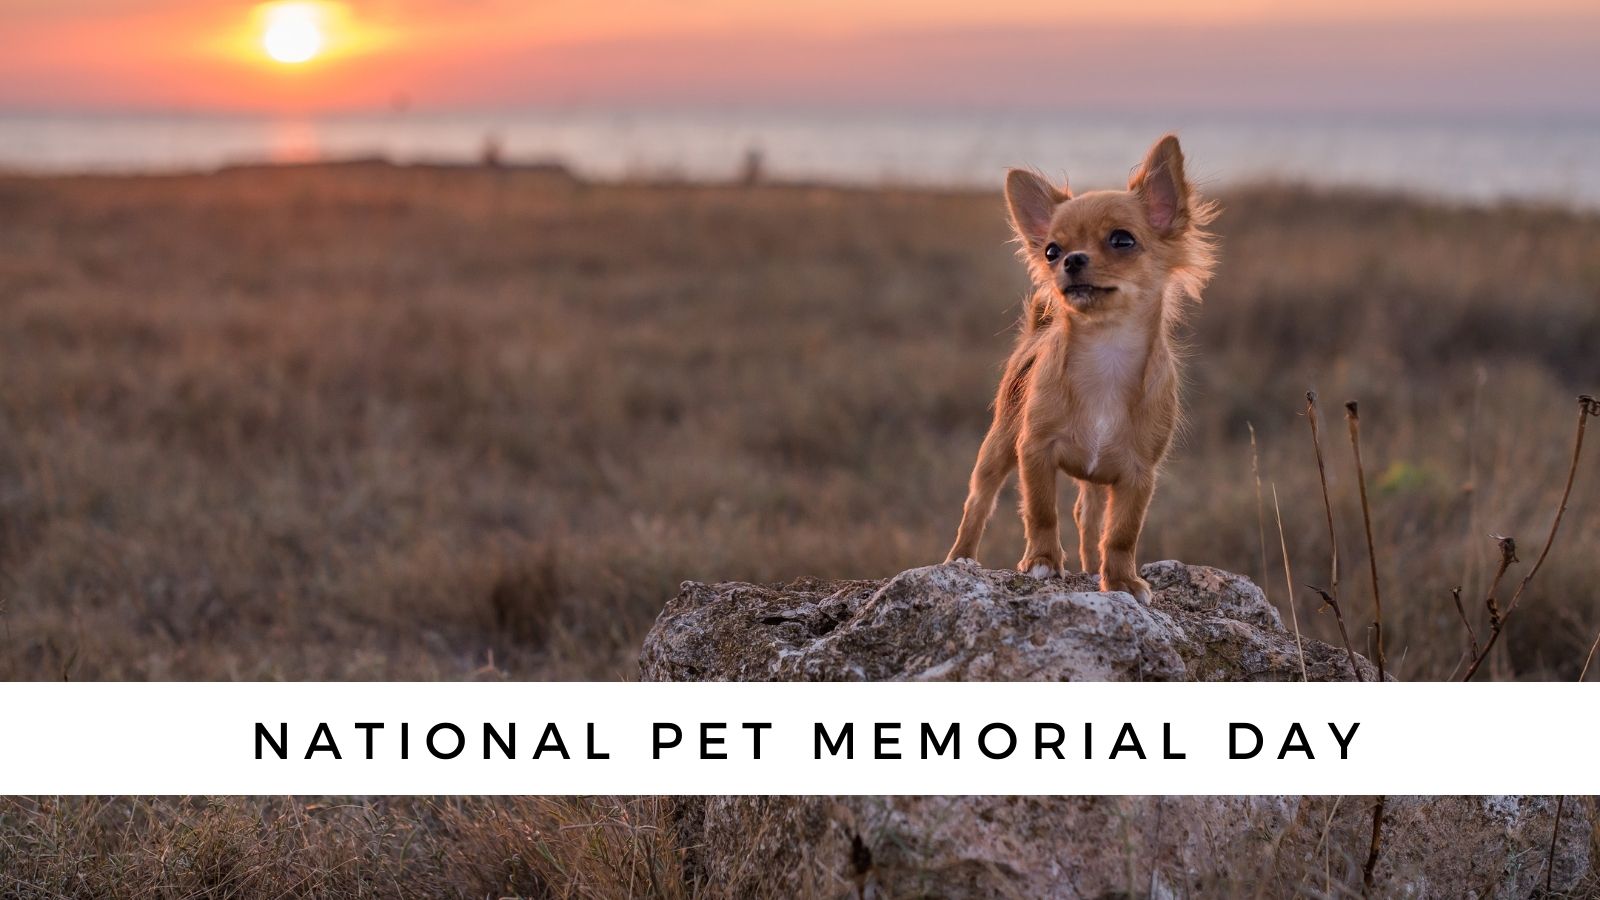 National Pet Memorial Day & Tips for Healing Following Loss of a Pet